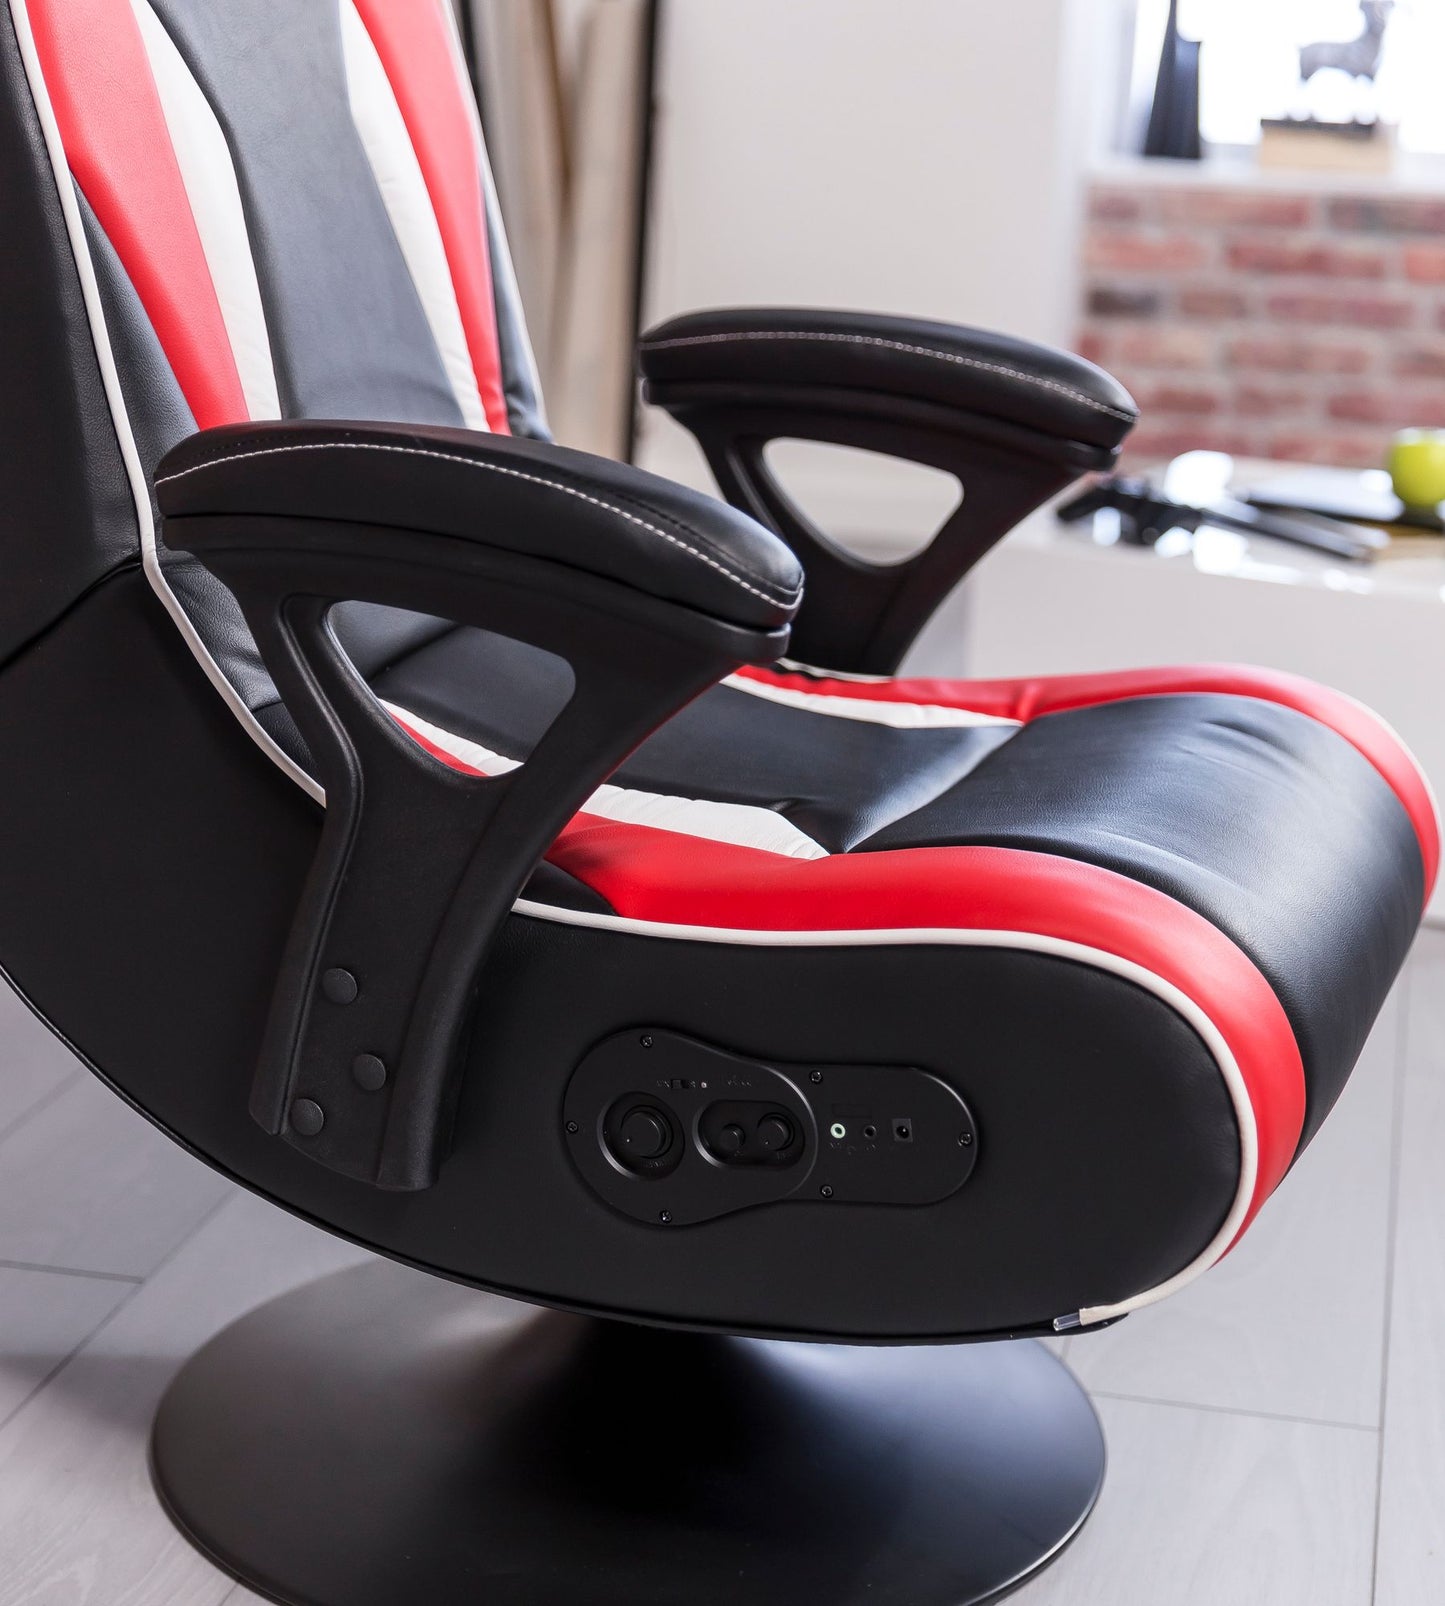 Gamingchair gamebooth